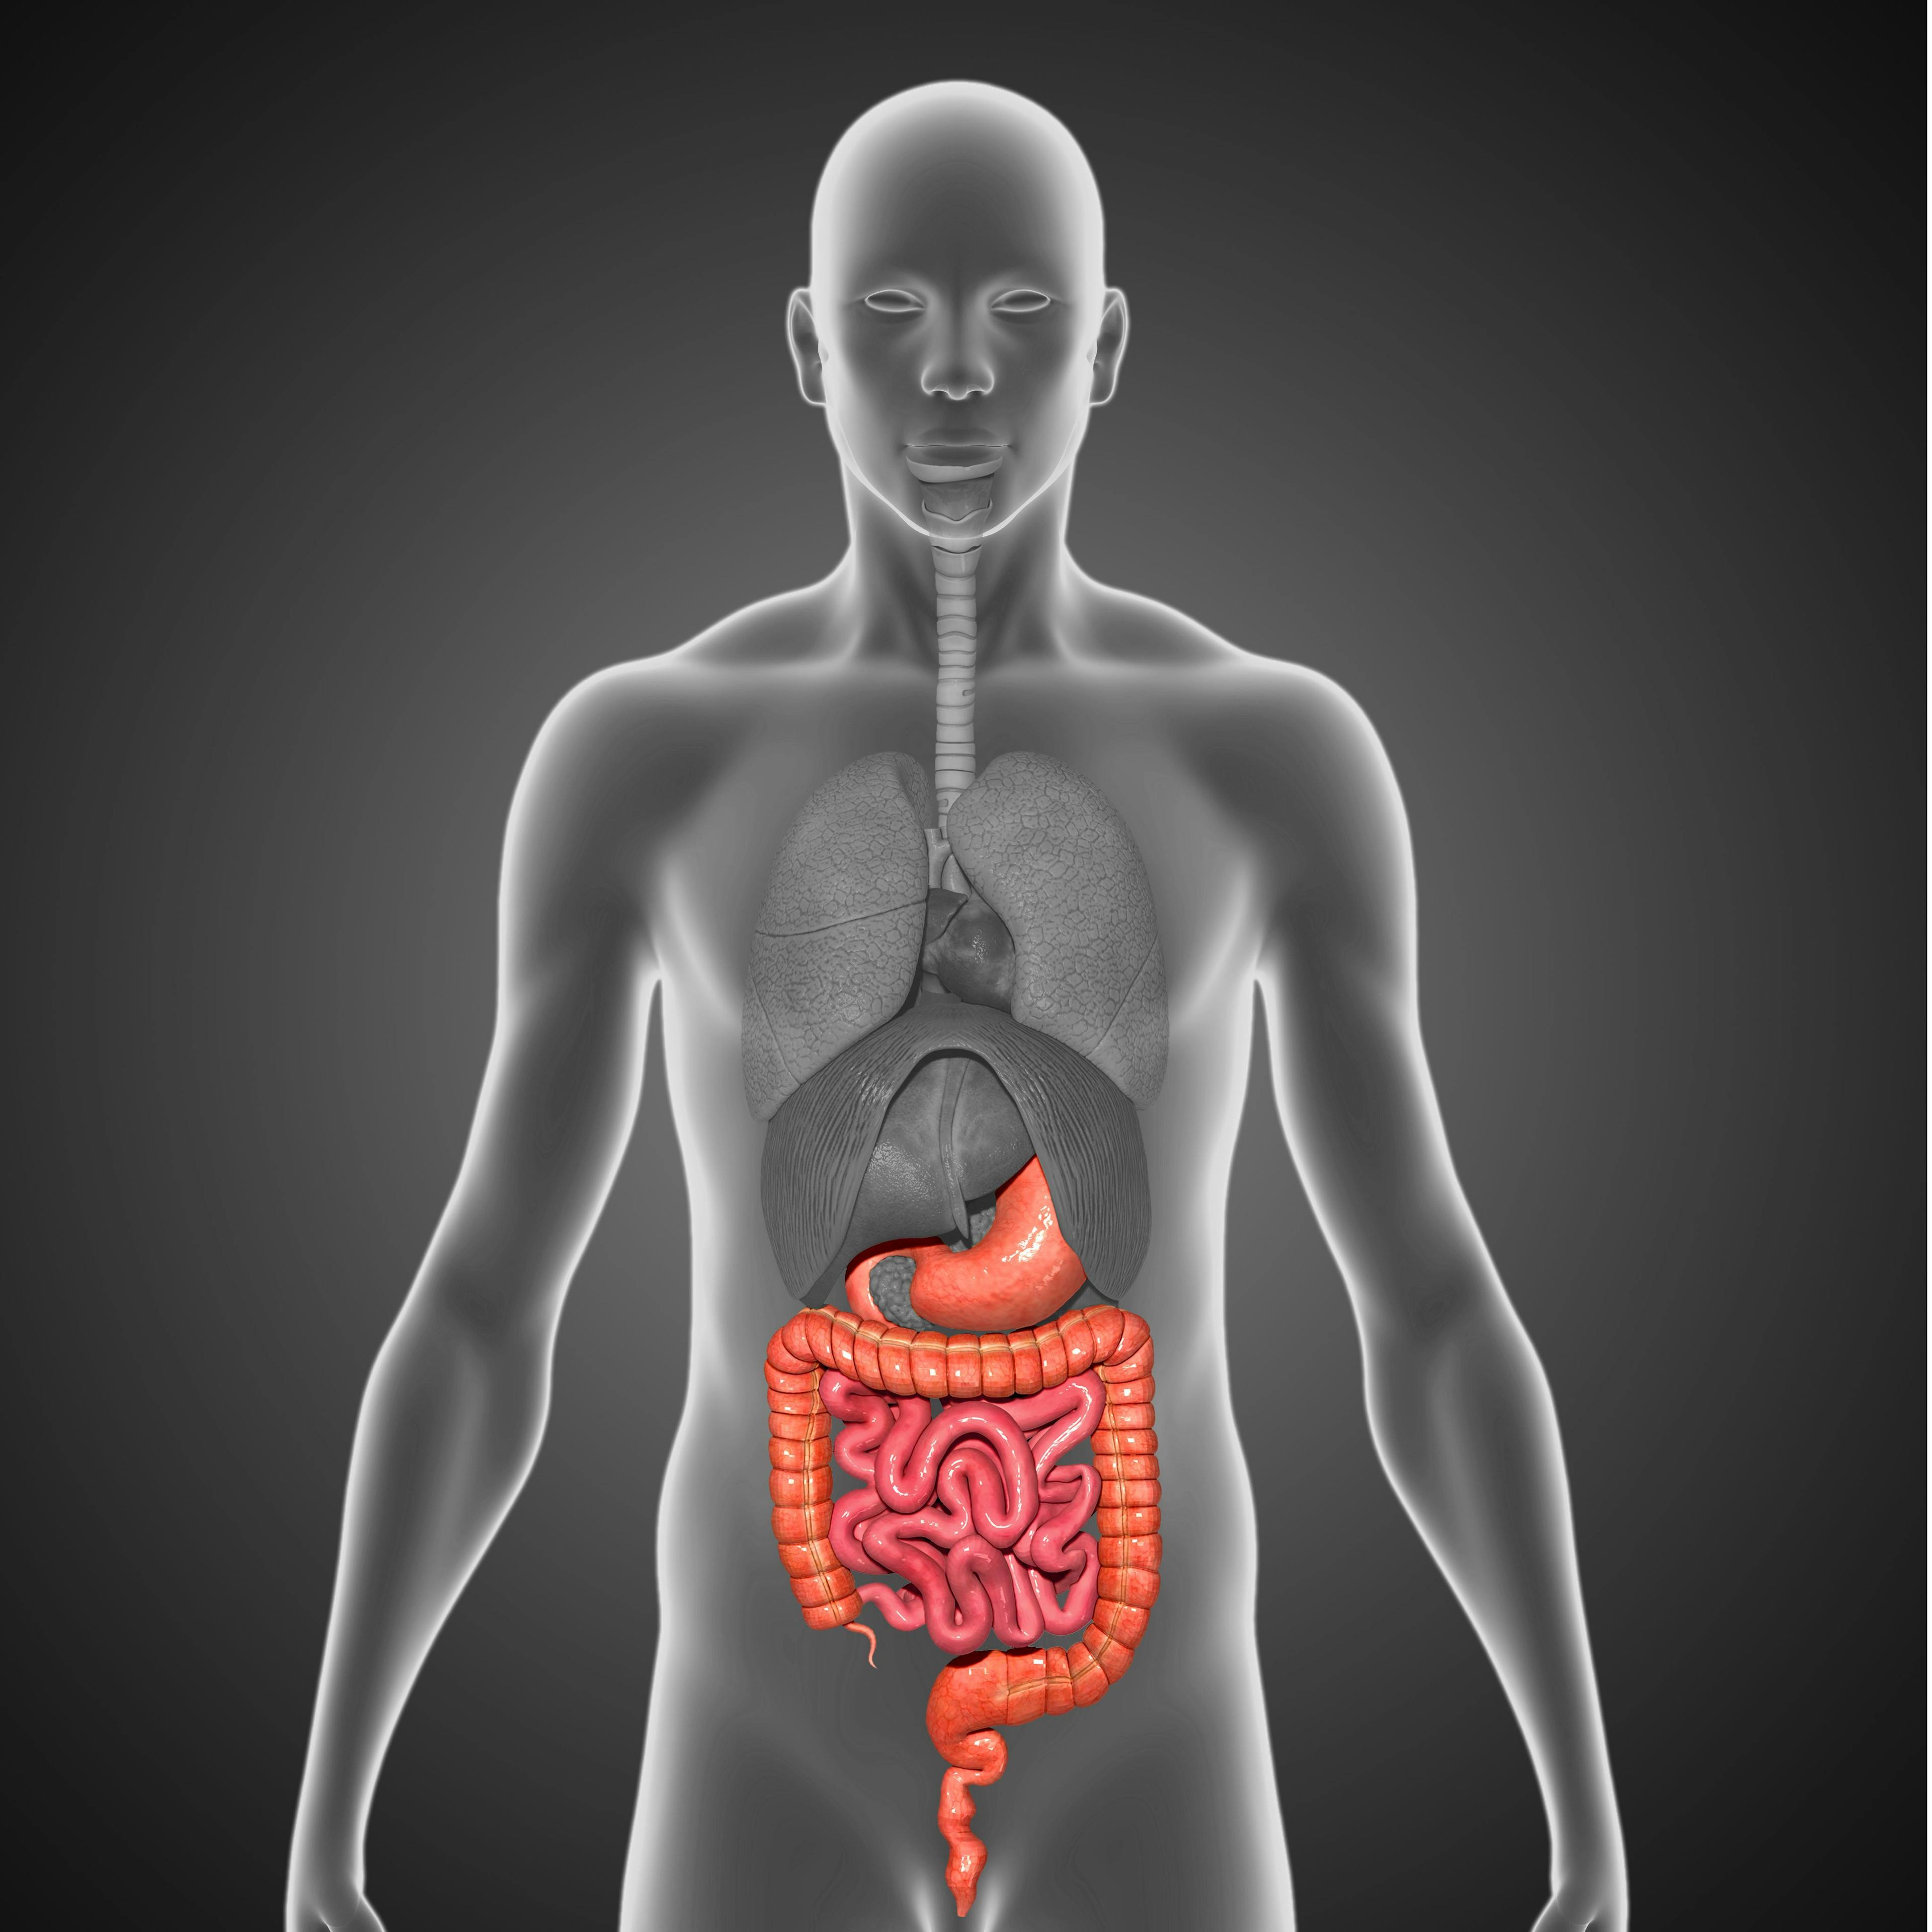 Intestinal Microbiota May Potentially Serve as Therapeutic Target in PAH